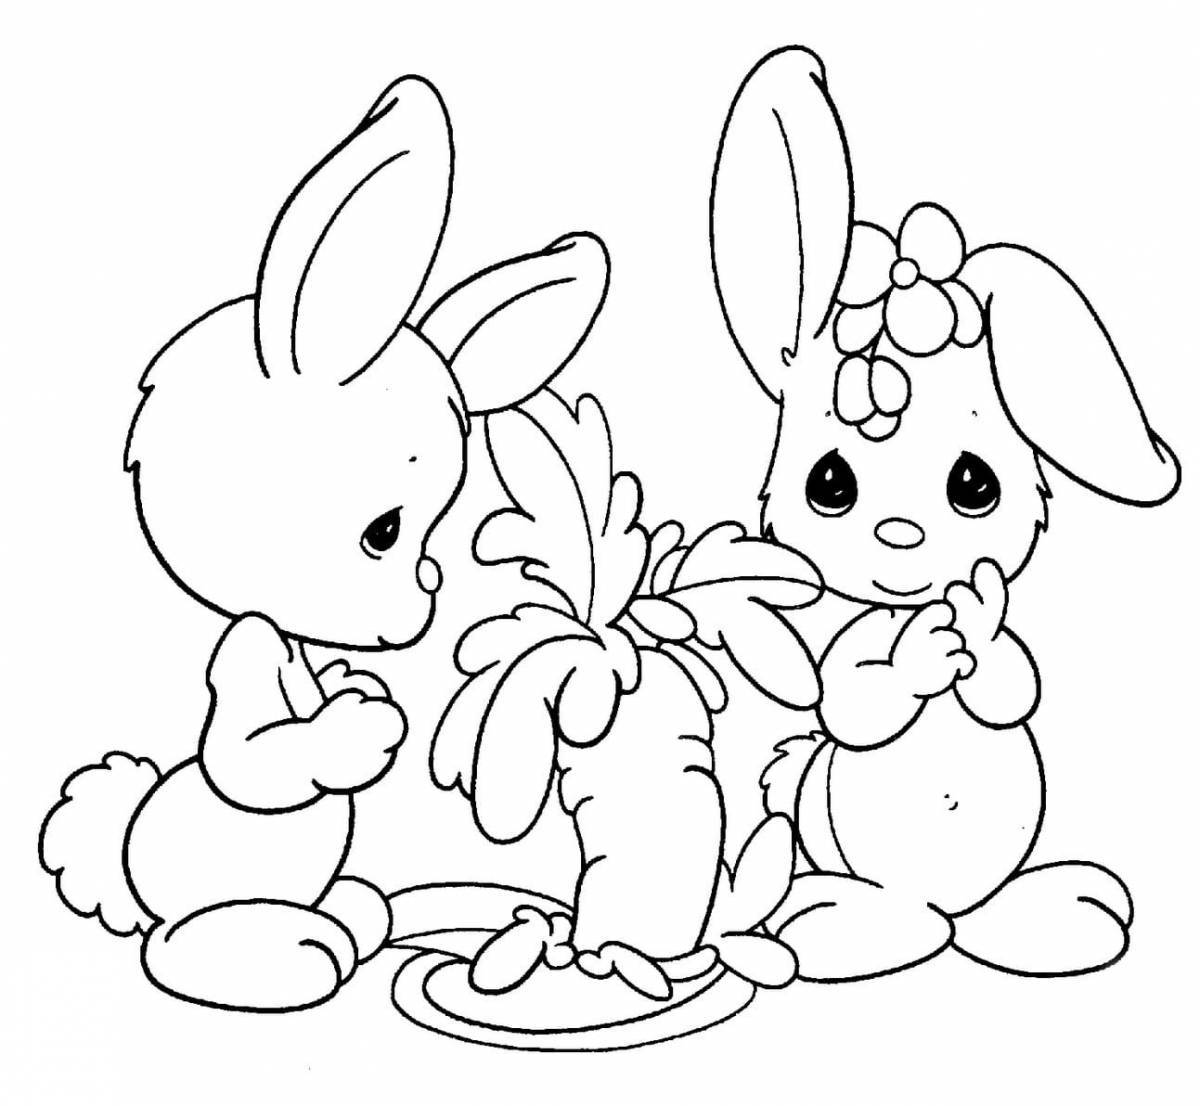 Silly bunny coloring book for kids